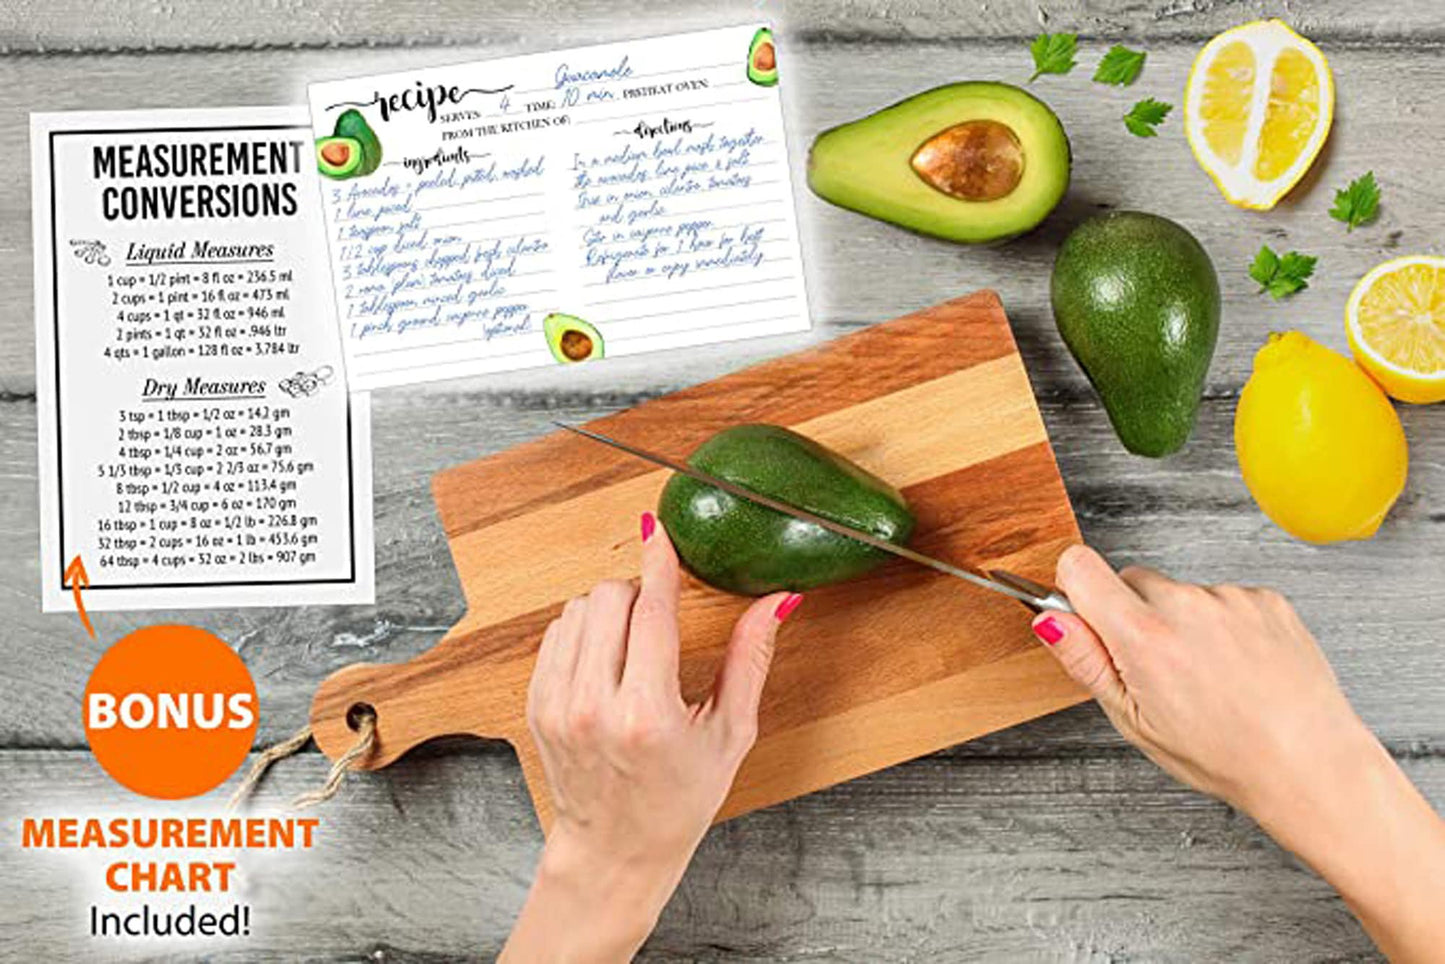 Avocado Recipe Cards 4x6 Inch Cute Notecards - Matte, Non-Smudge, Thick Paper - Lined Recipe Template Index Cards - Wedding, Bridal Showers